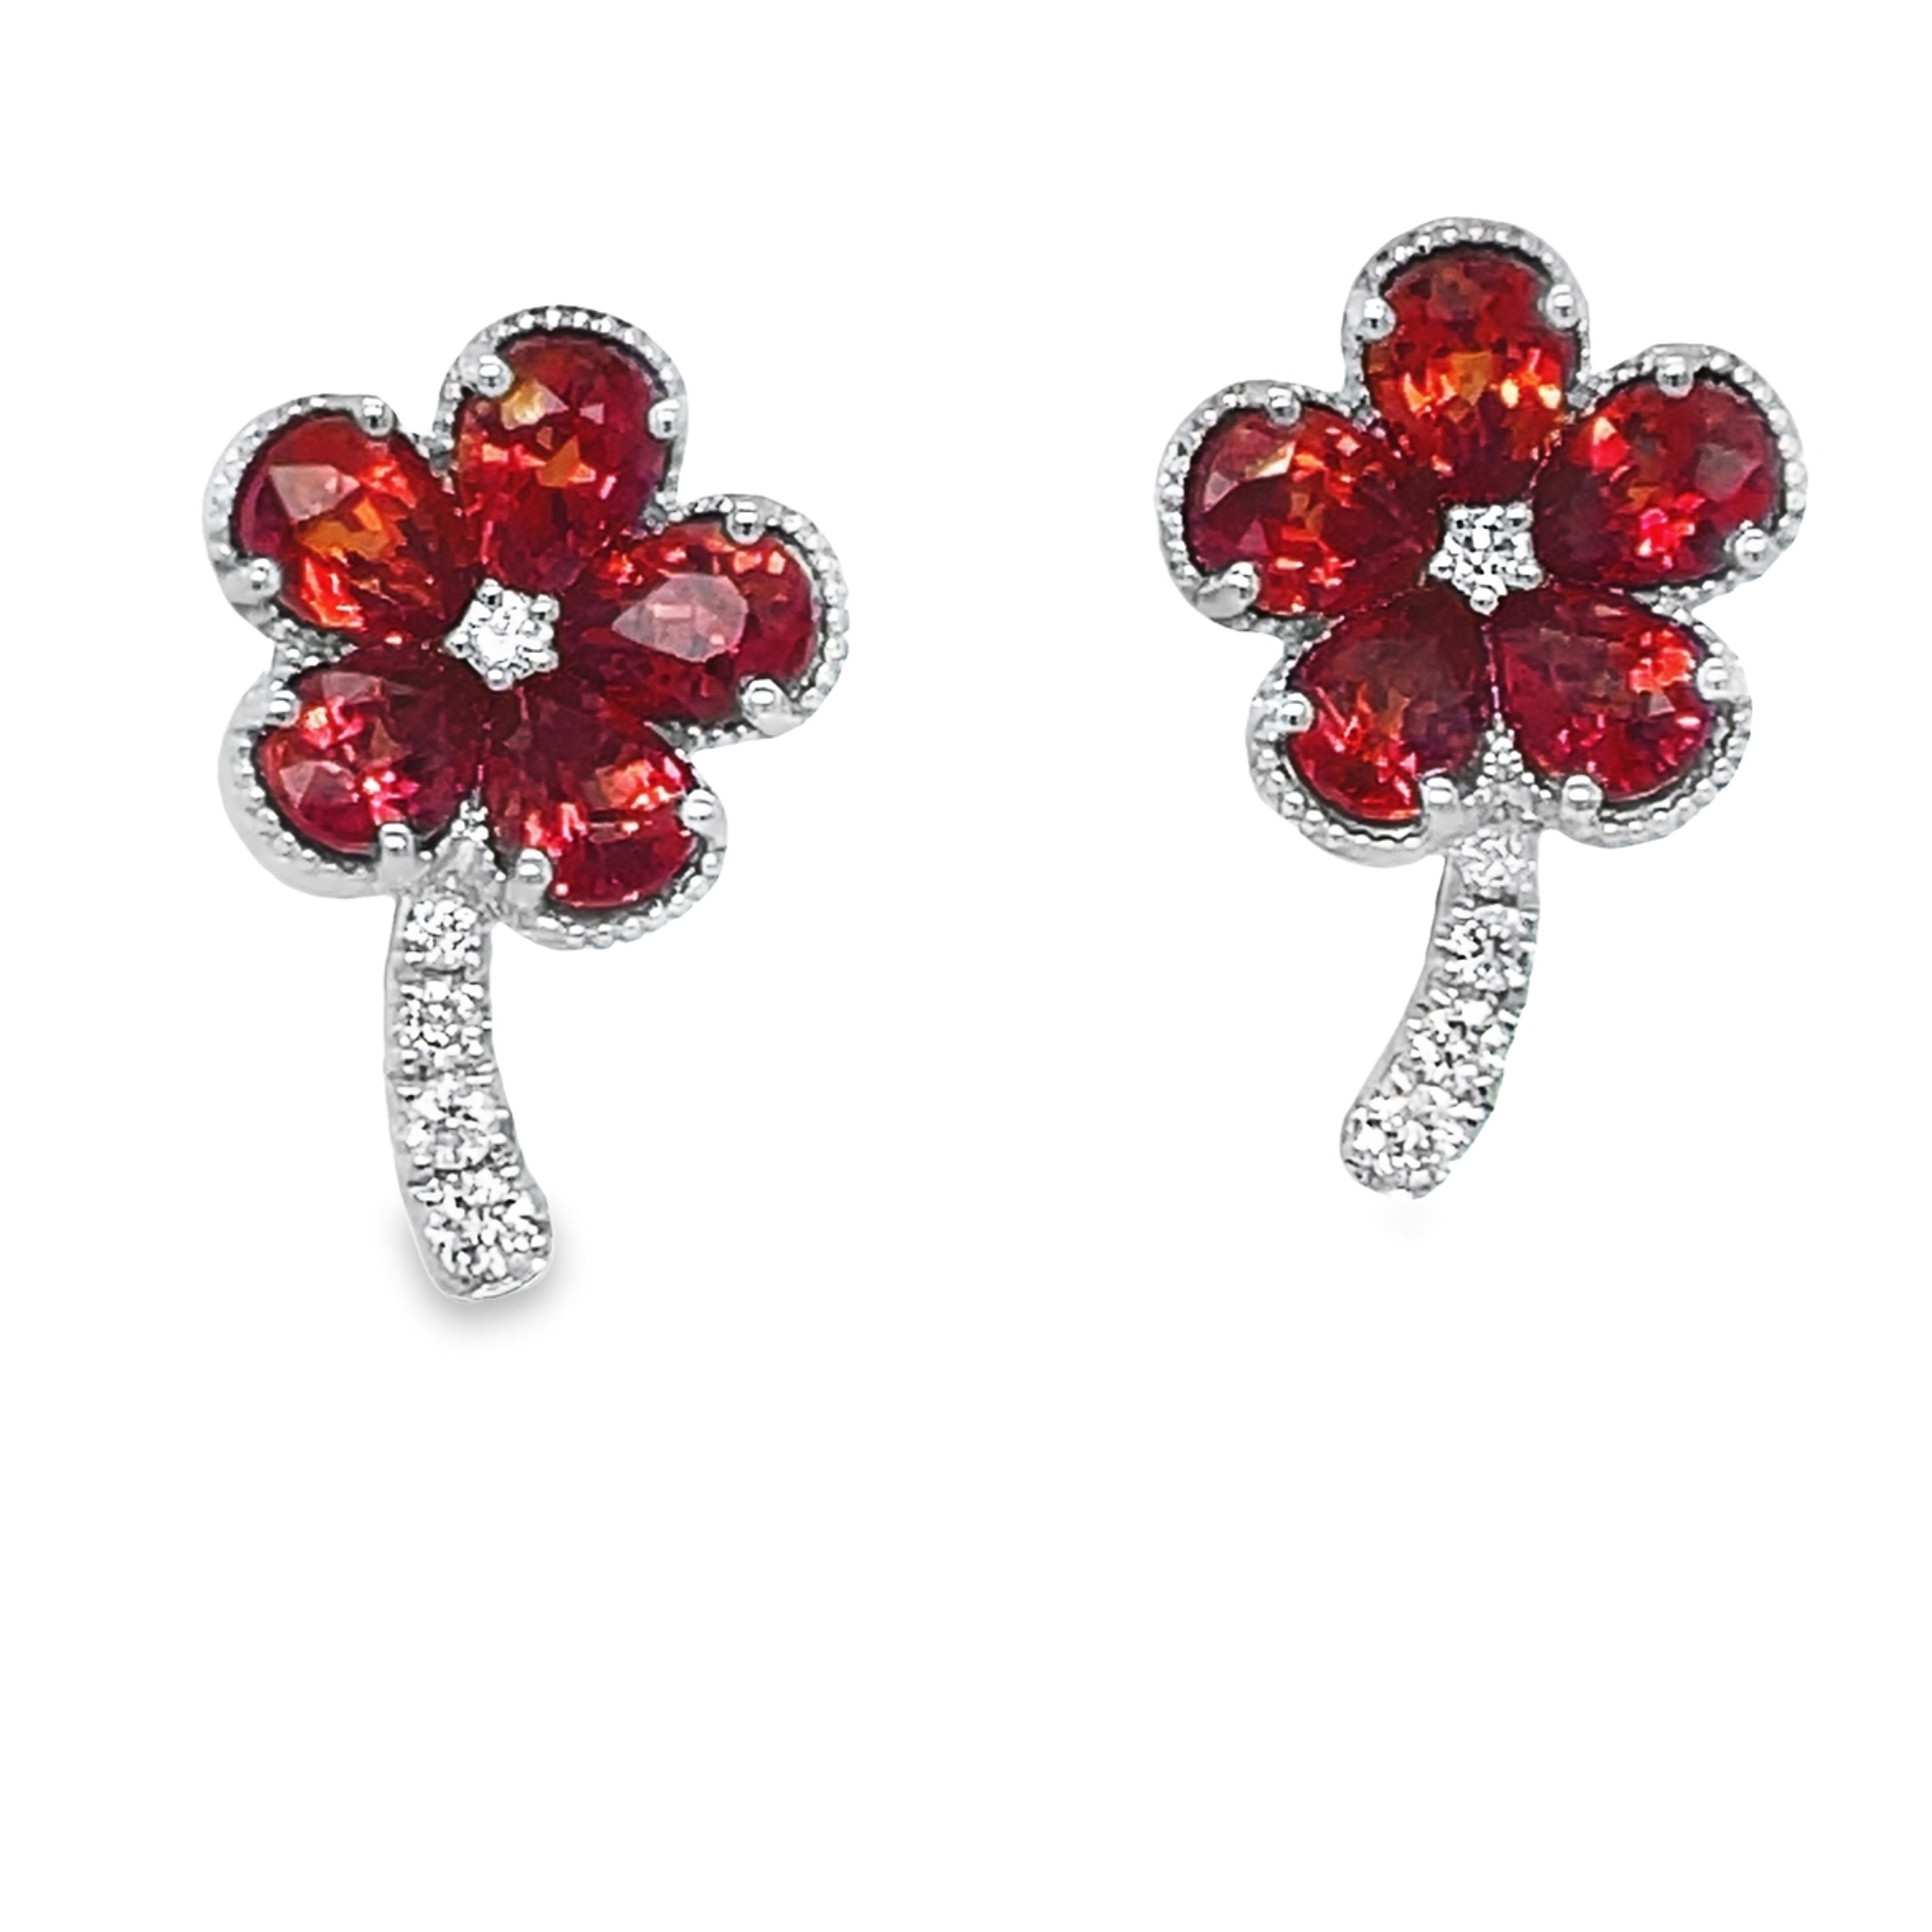 Expertly crafted with 18k white gold, these Orange Sapphire &amp; Diamond Flower Earrings feature intense orange sapphires totaling 2.19 carats and round diamonds totaling 0.11 carats. The secure friction backs ensure comfortable and worry-free wear. Elevate your look with the vibrant color and sparkling beauty of these stunning earrings.